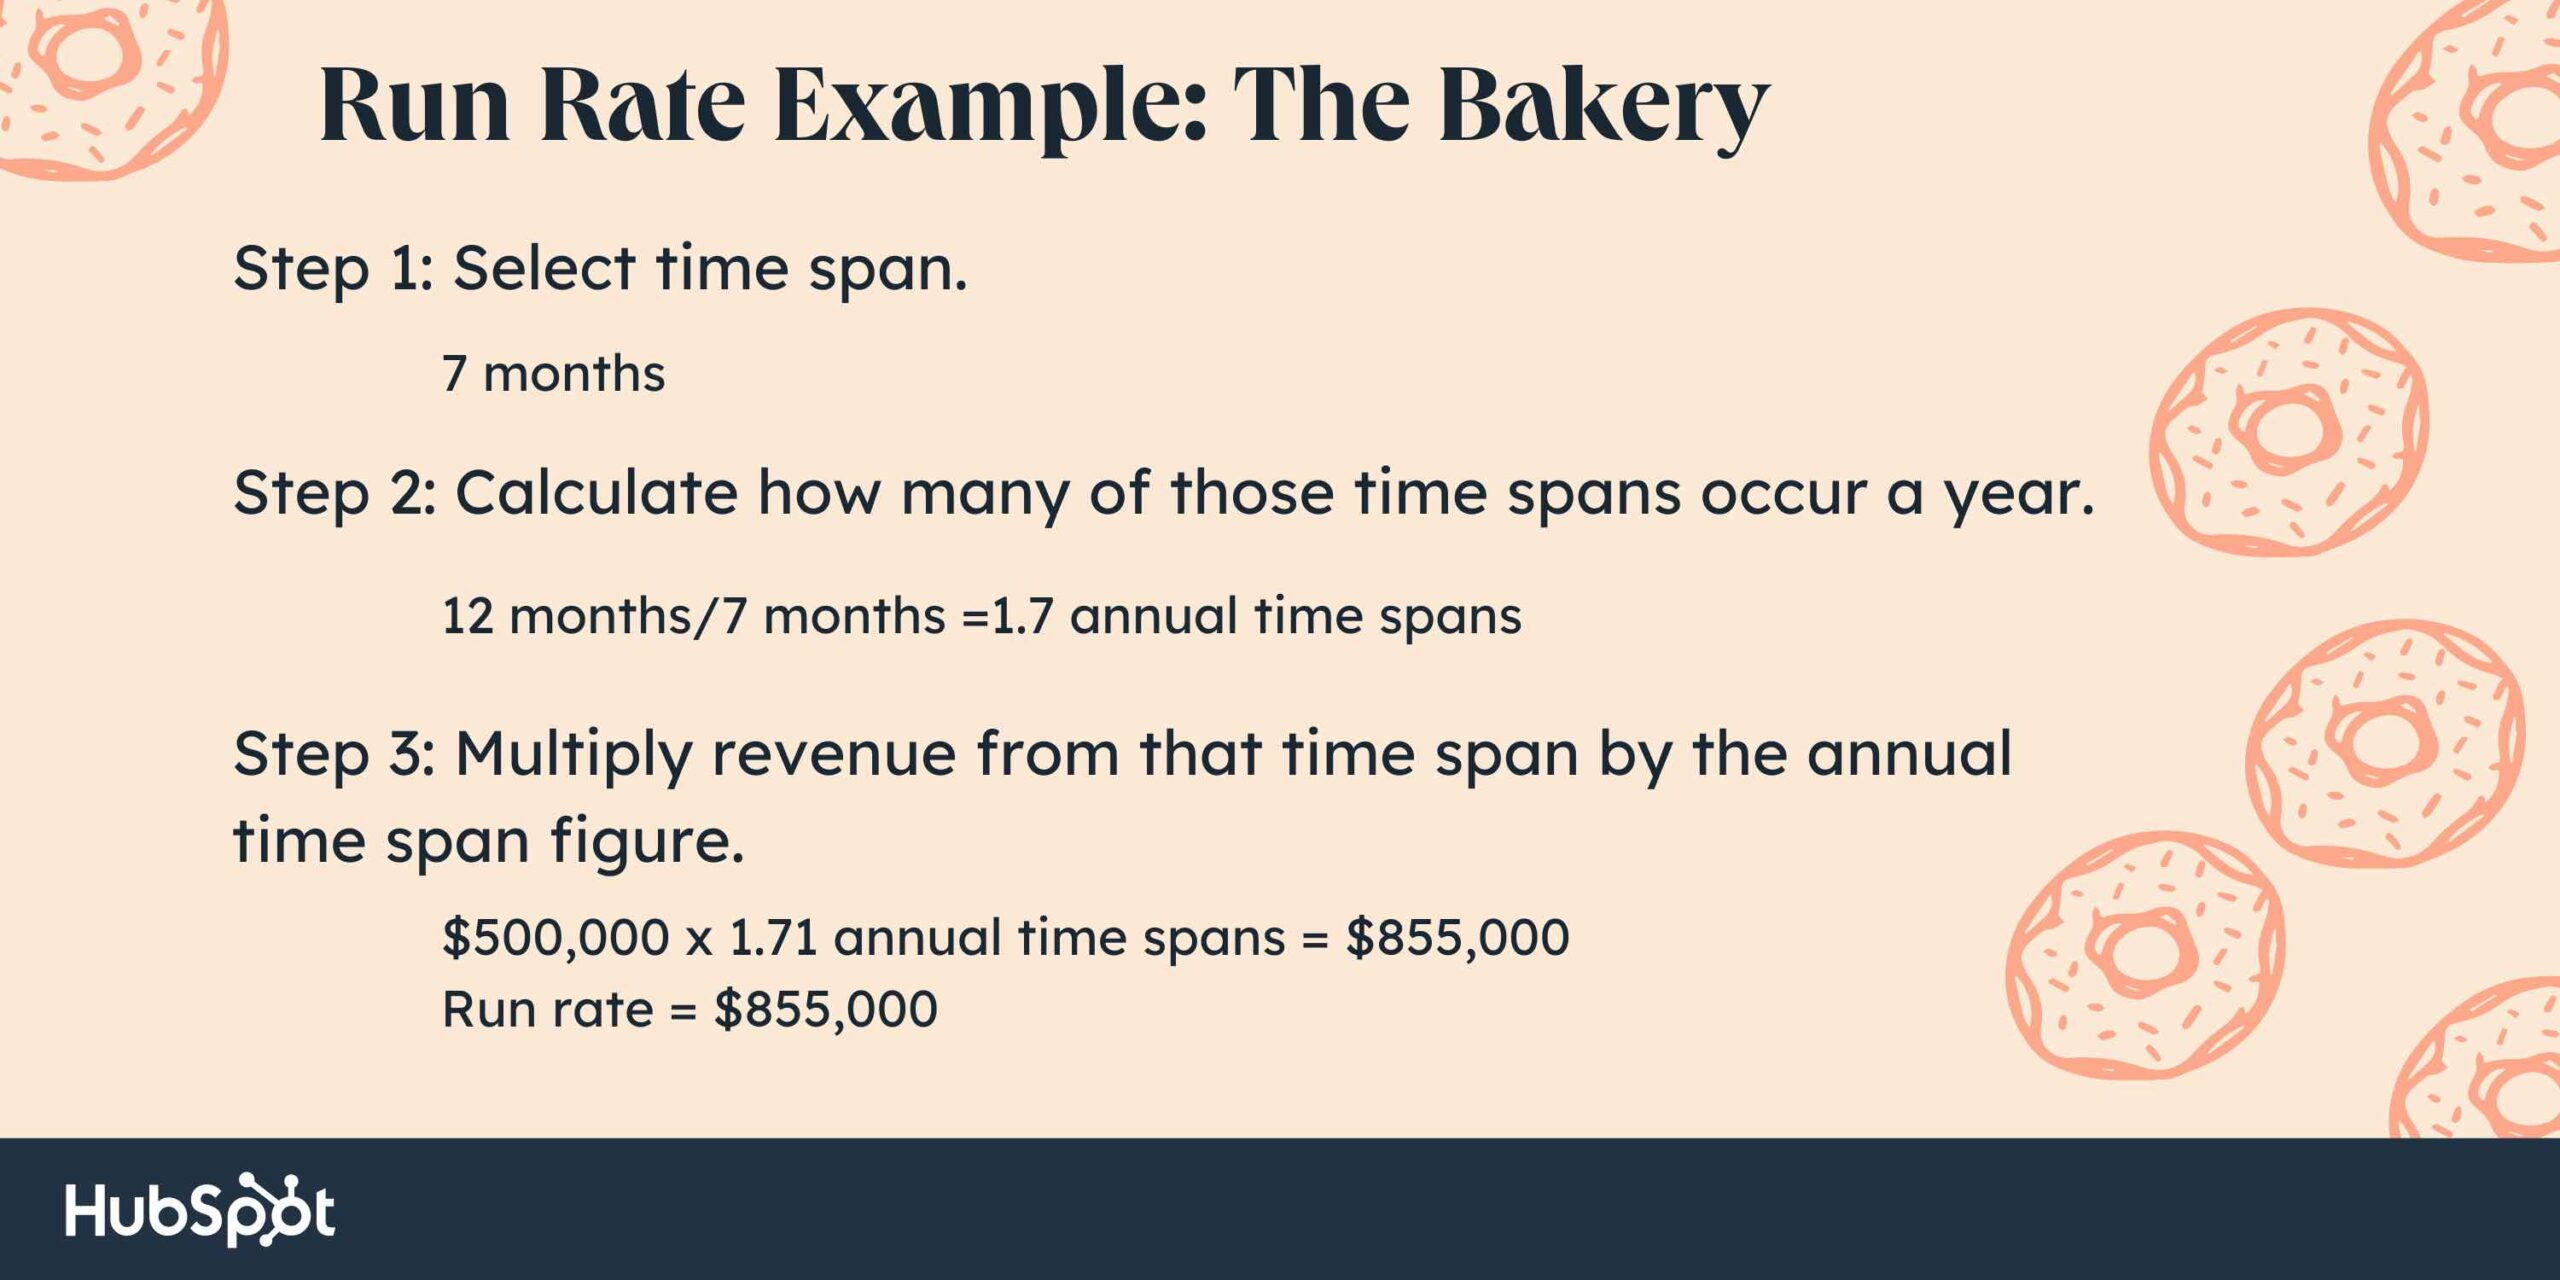 how to calculate run rate, bakery example